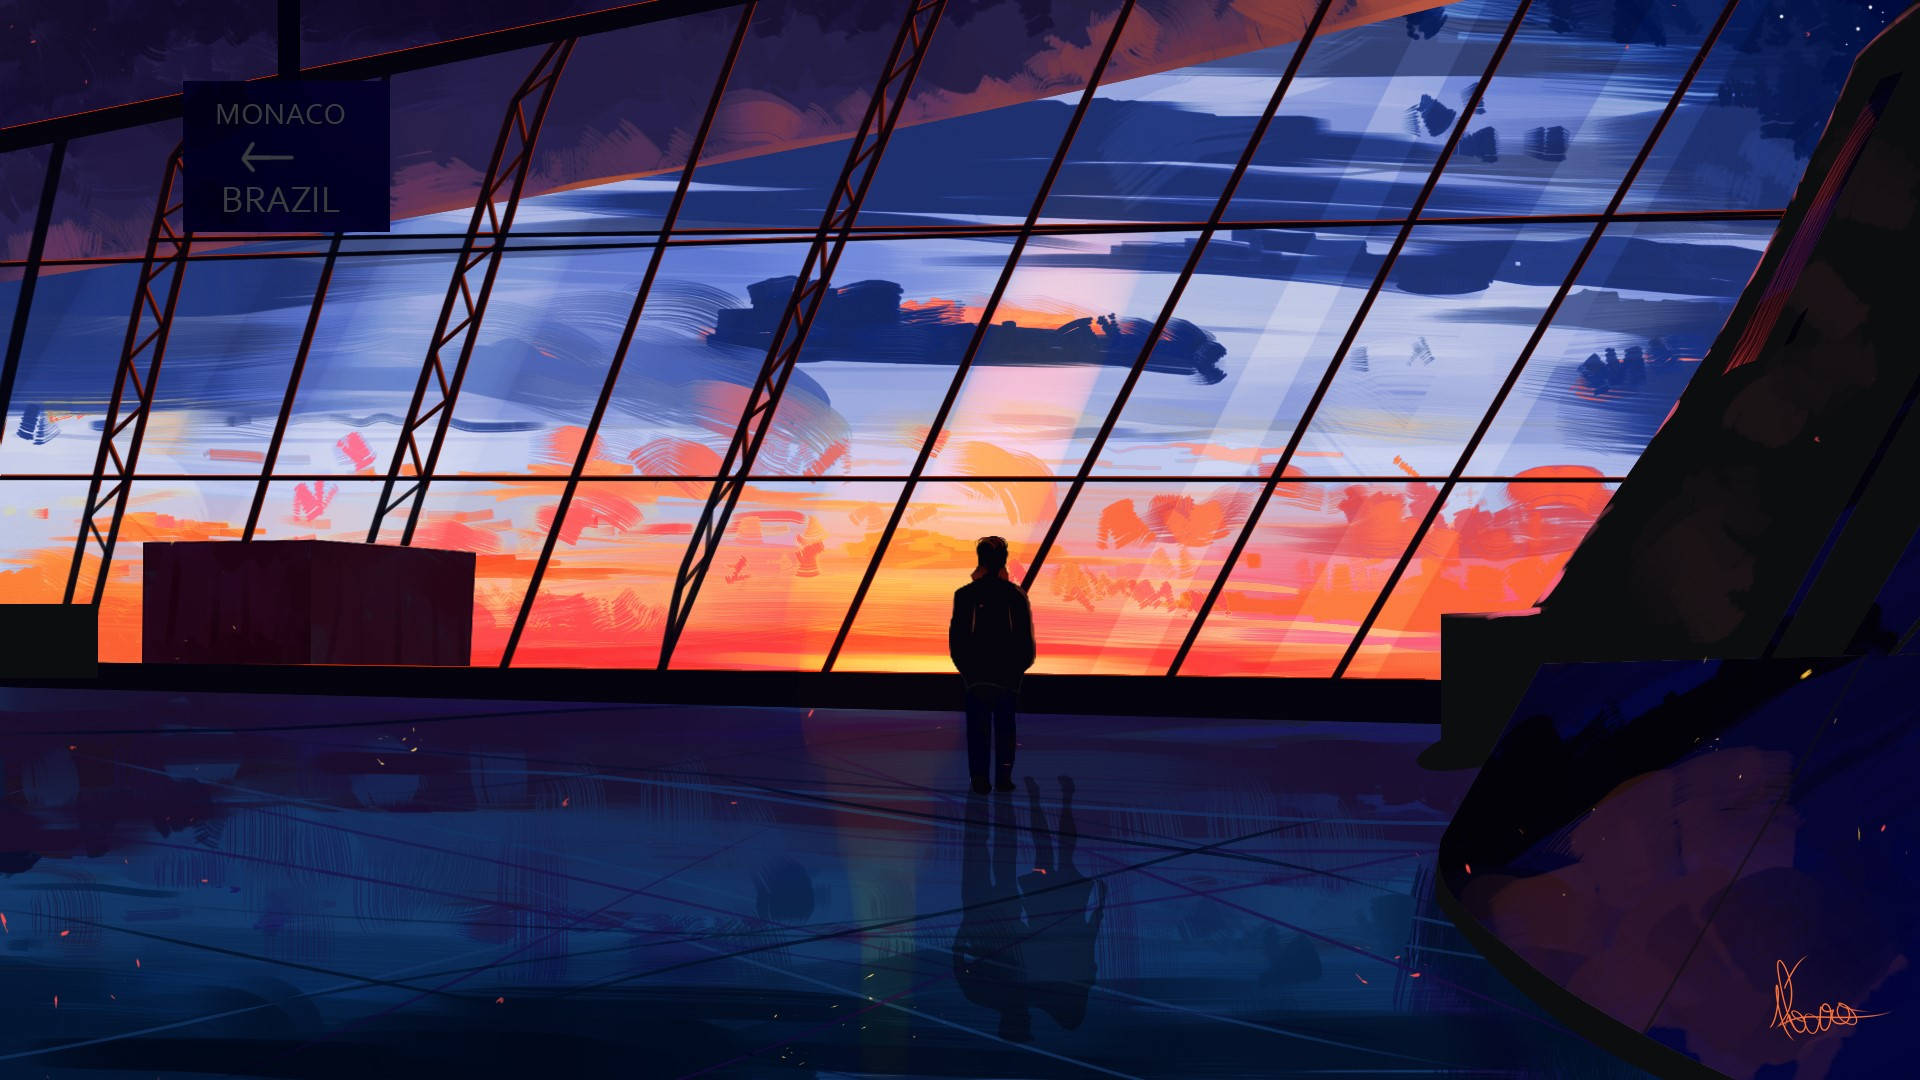 Animated Image Of An Airport